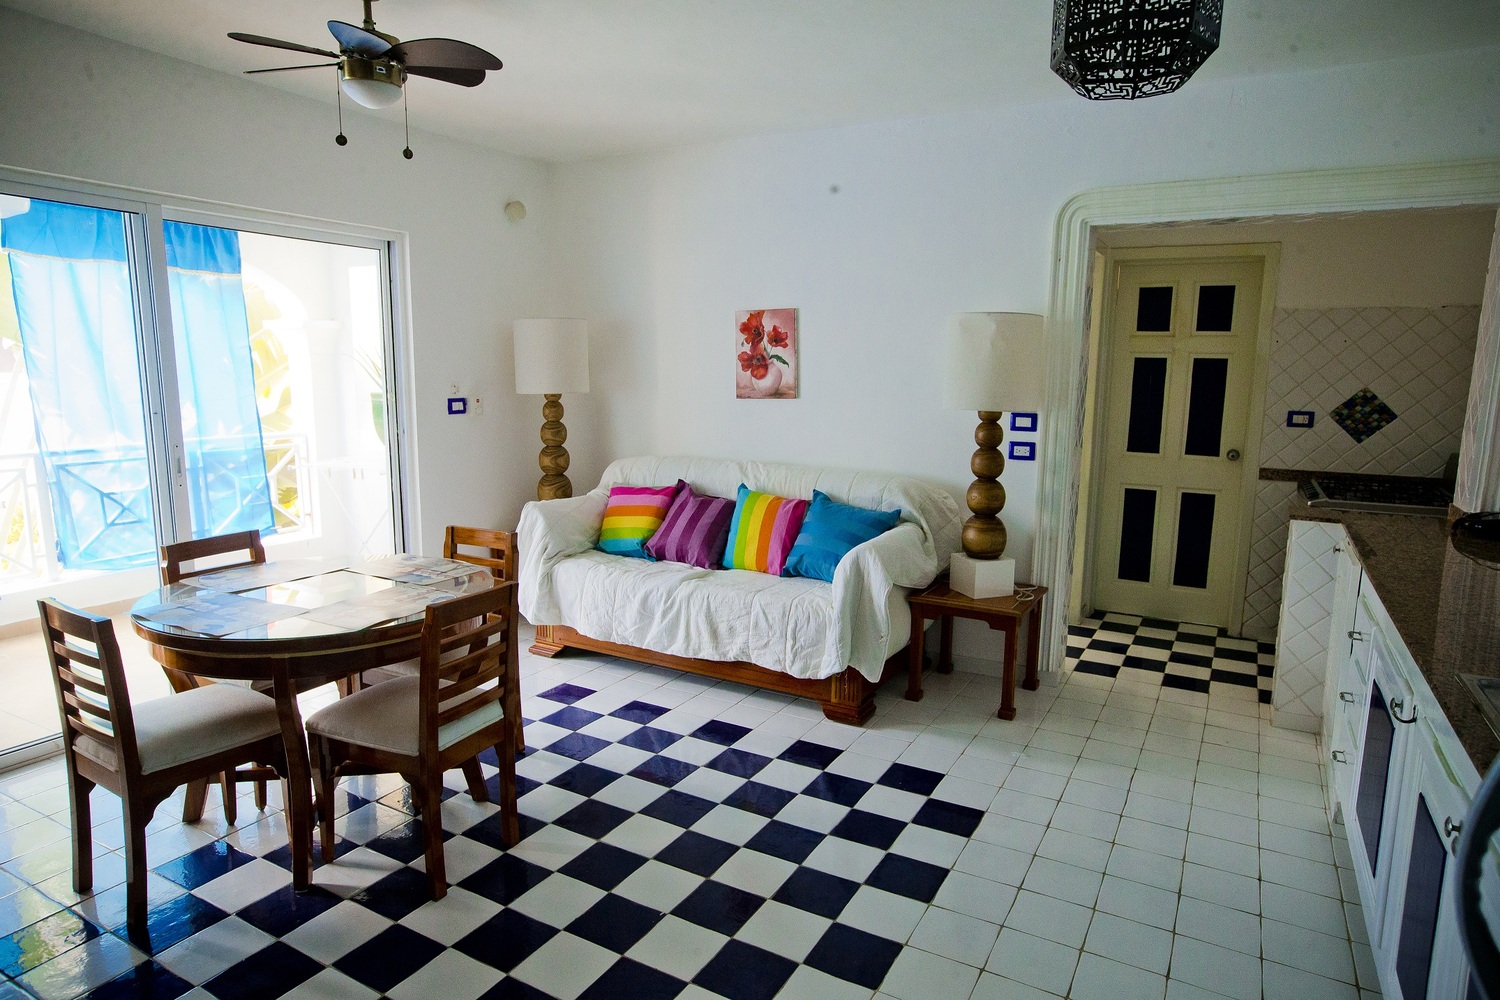 For sale a cozy apartment of 70 m2 in the tourist center of Bavaro.